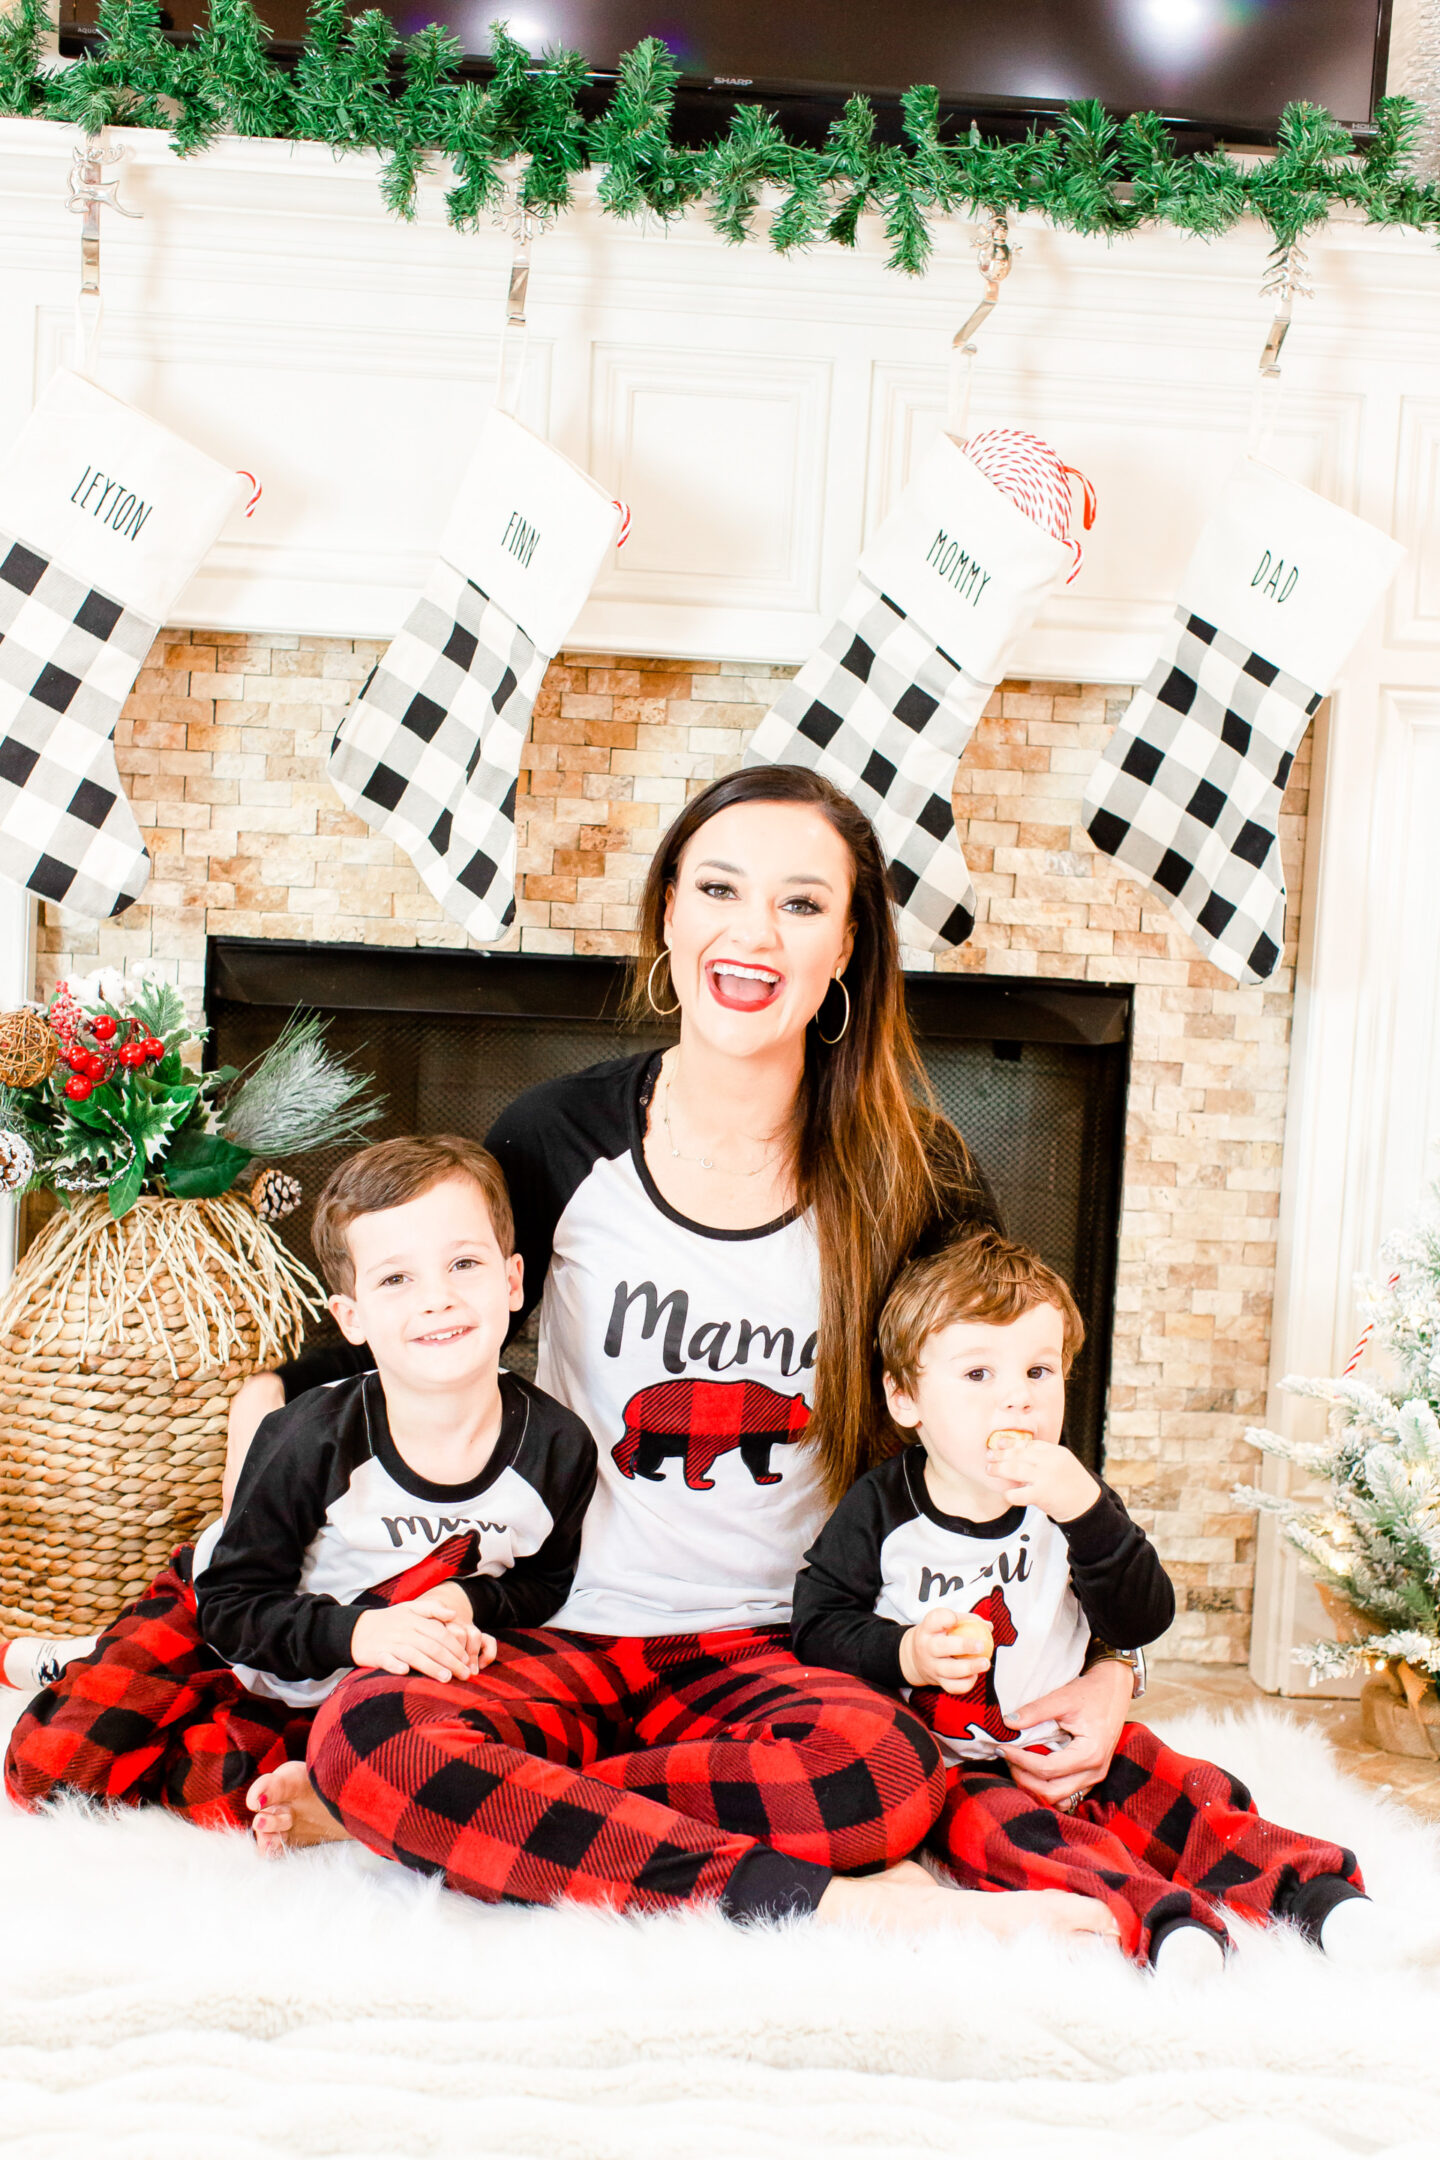 Entertain The Kids During The Busy Holiday Season With This Great Gift Idea For Kids: Heather sits with her sons in front of a fireplace wearing matching pajamas